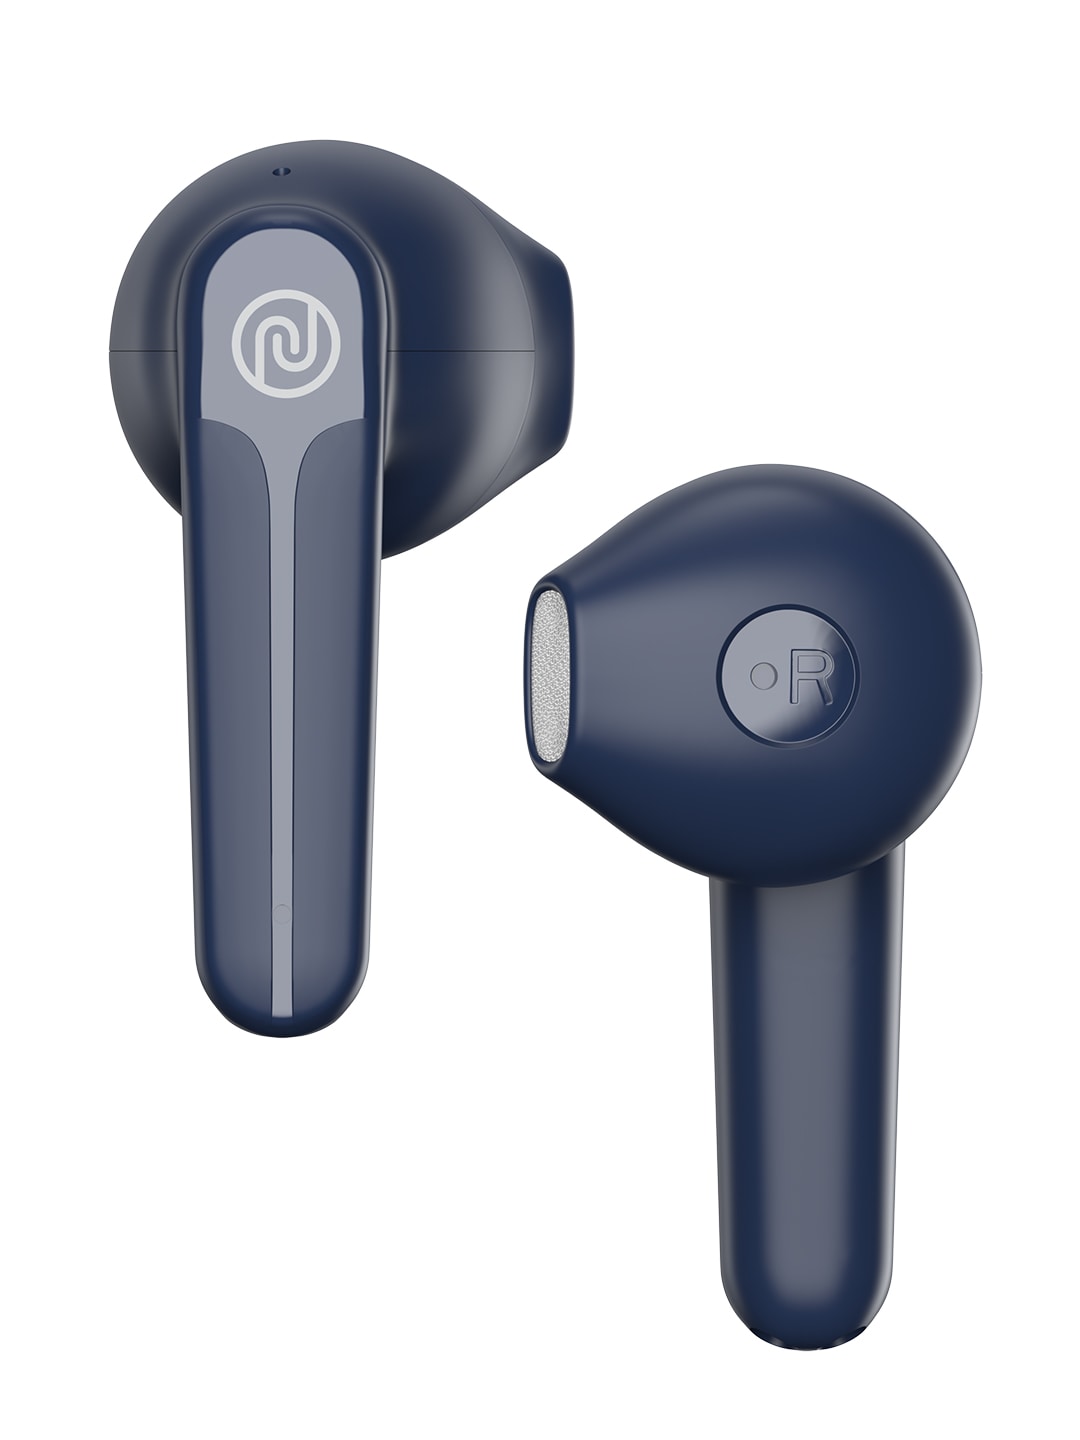 NOISE Buds VS202 Truly Wireless Bluetooth Earbuds - Midnight Blue Price in India